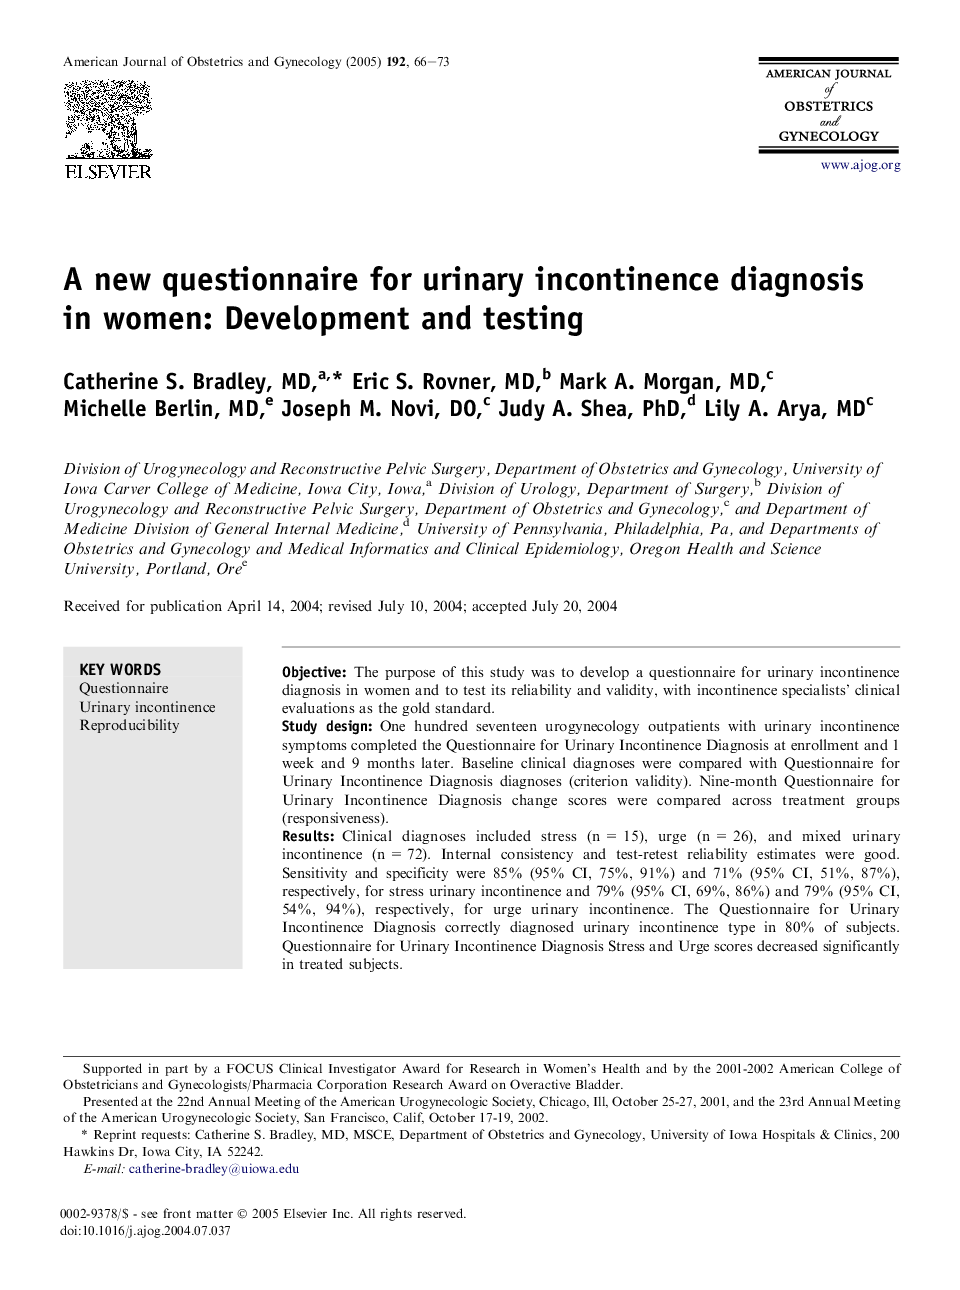 A new questionnaire for urinary incontinence diagnosis in women: Development and testing